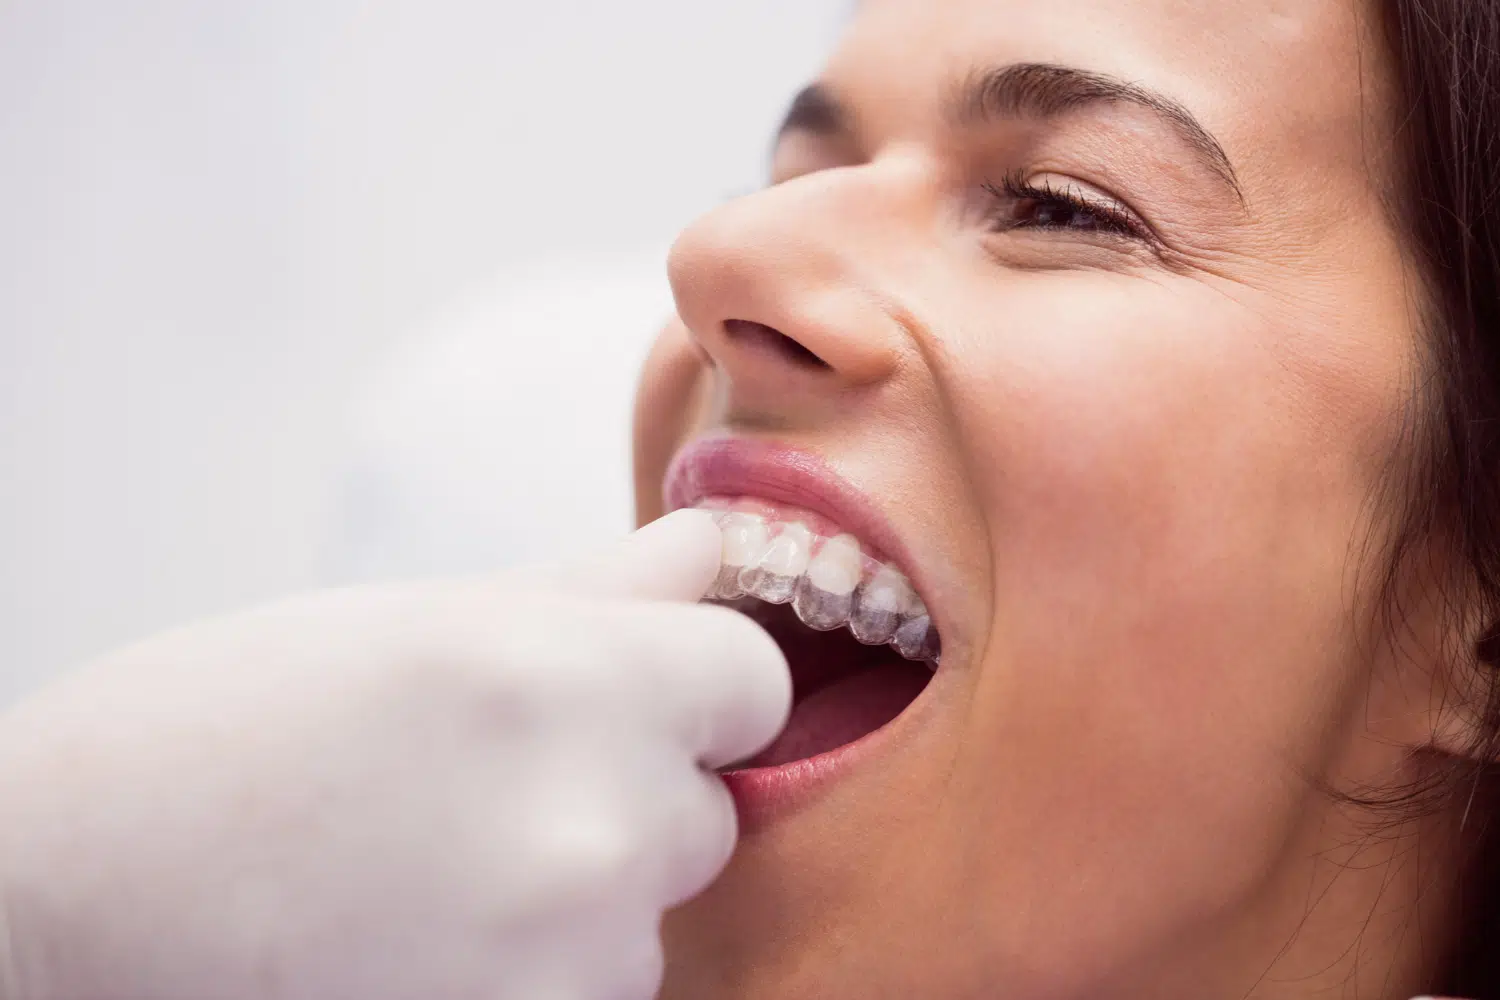 Invisalign In Edmonds, Wa: How To Get The Perfect Smile